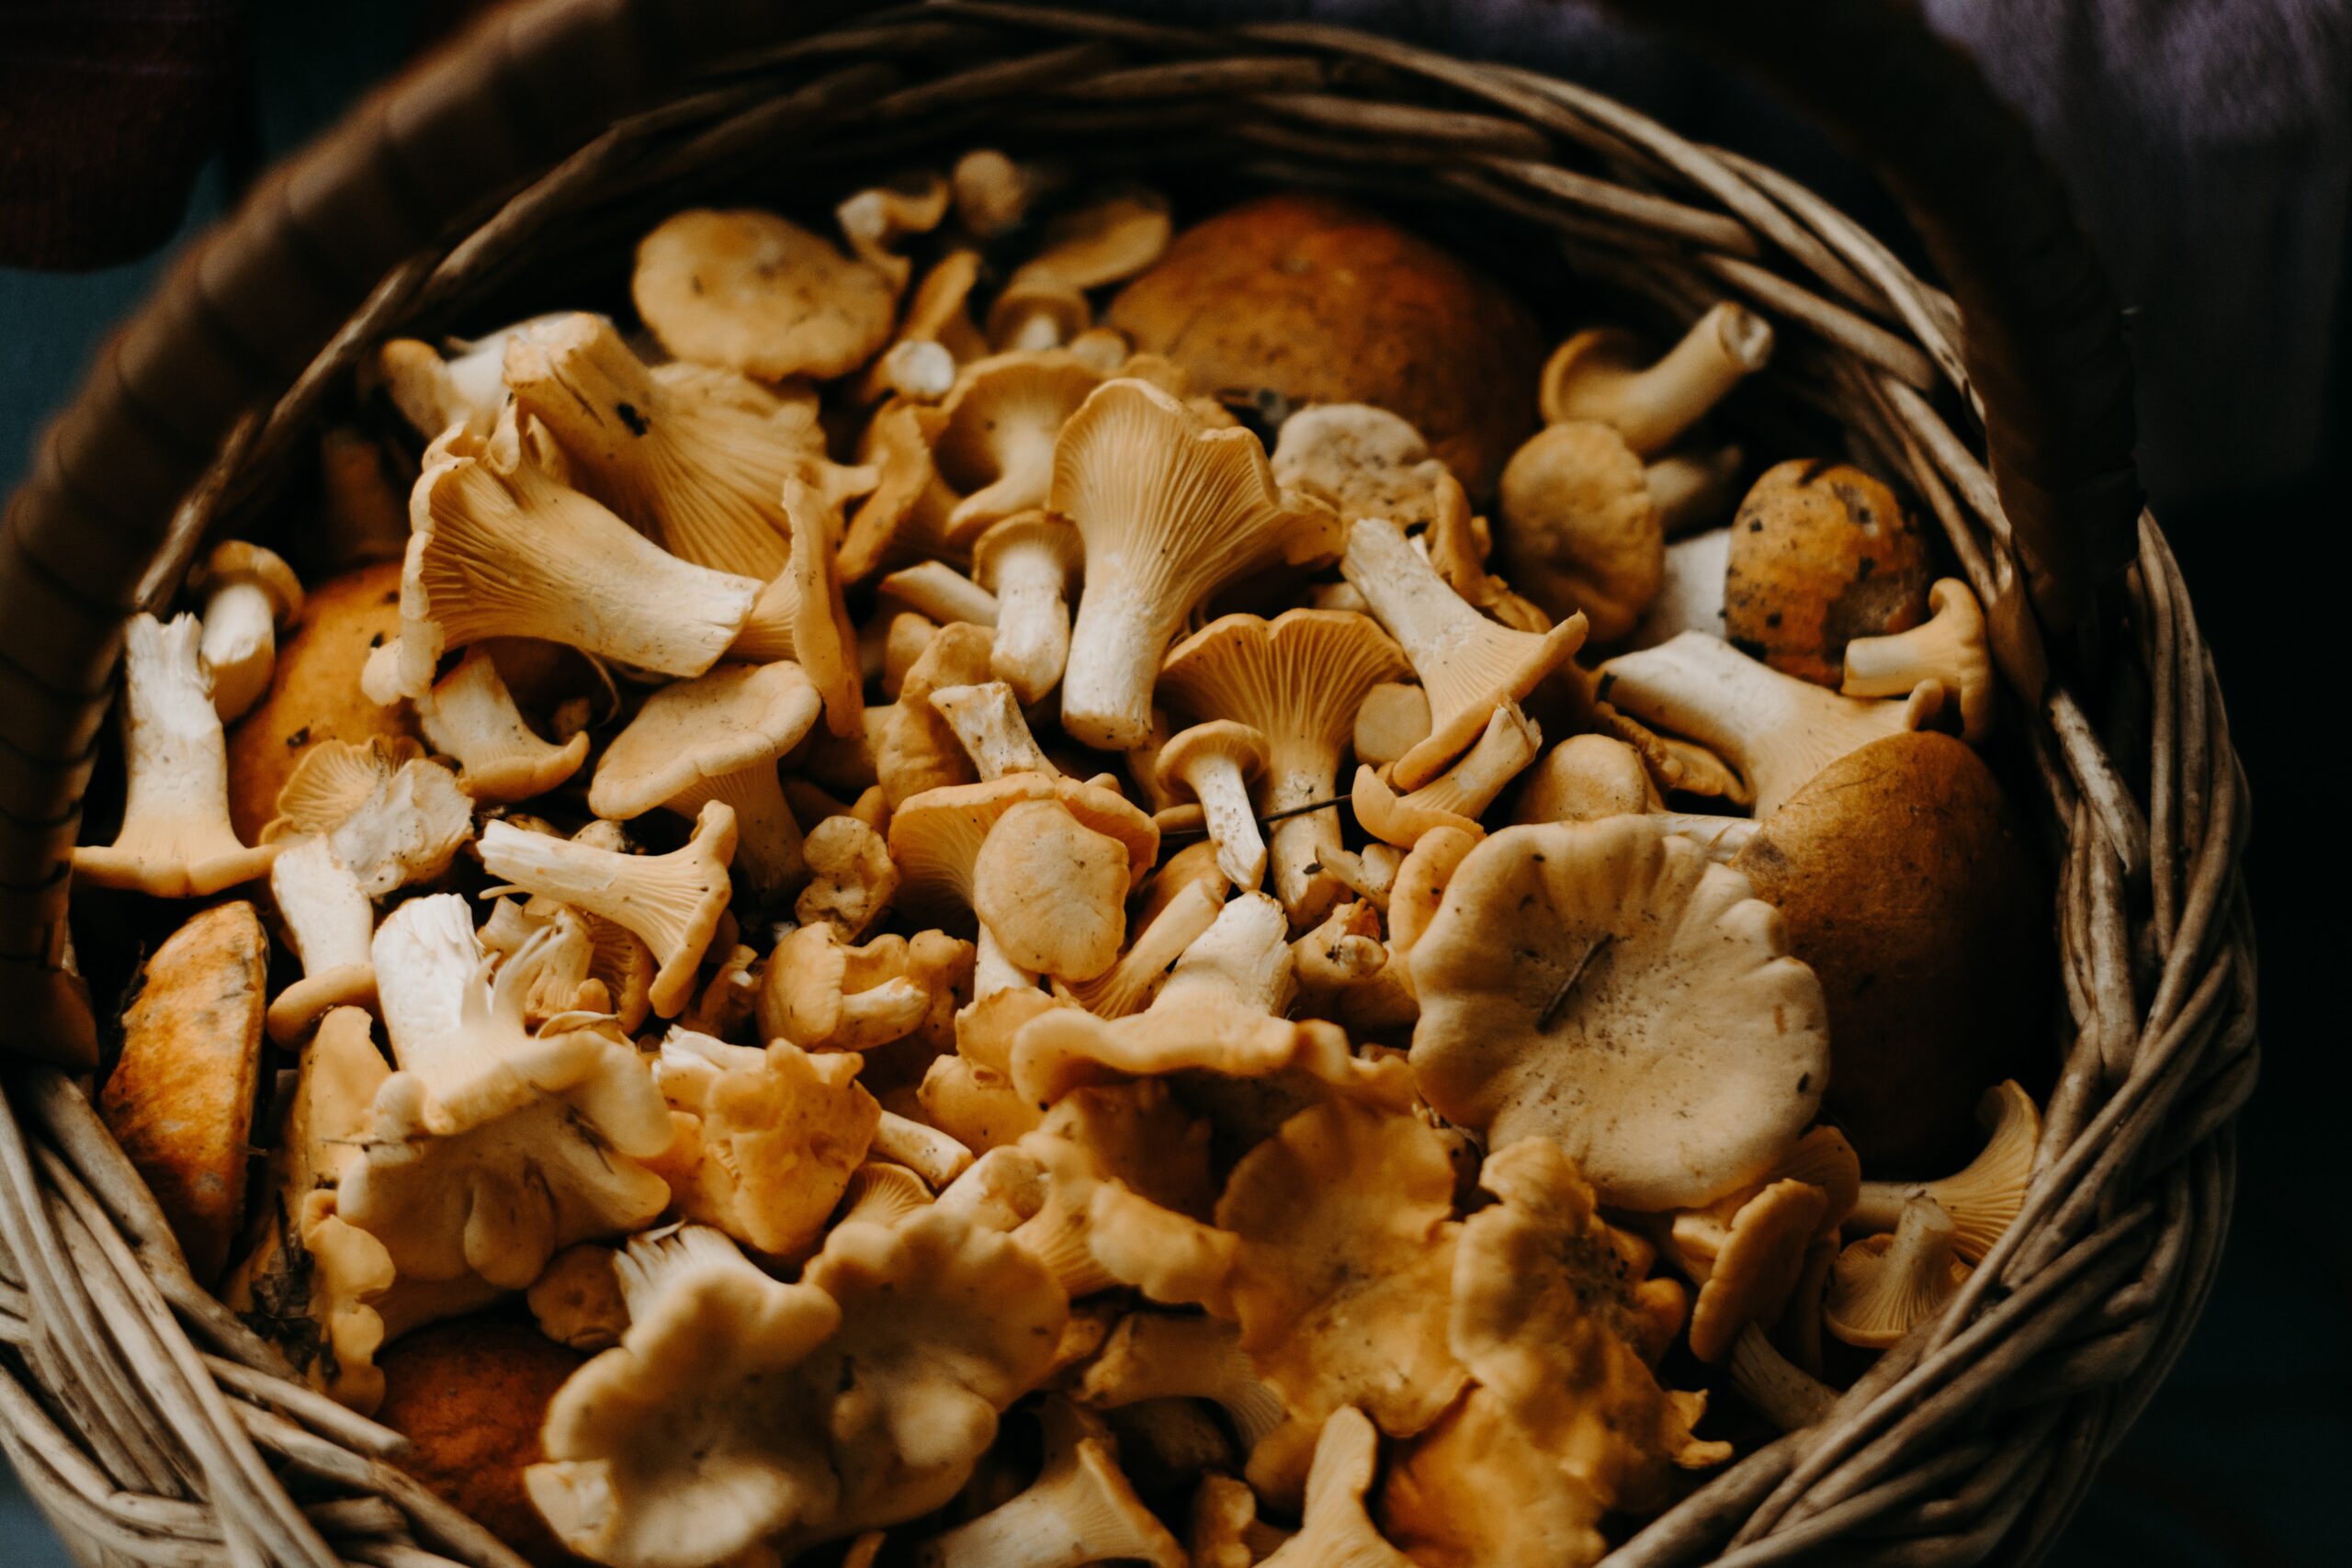 How To Use Mushrooms in Skincare – Top 5 Beauty Hacks You Didn’t Know